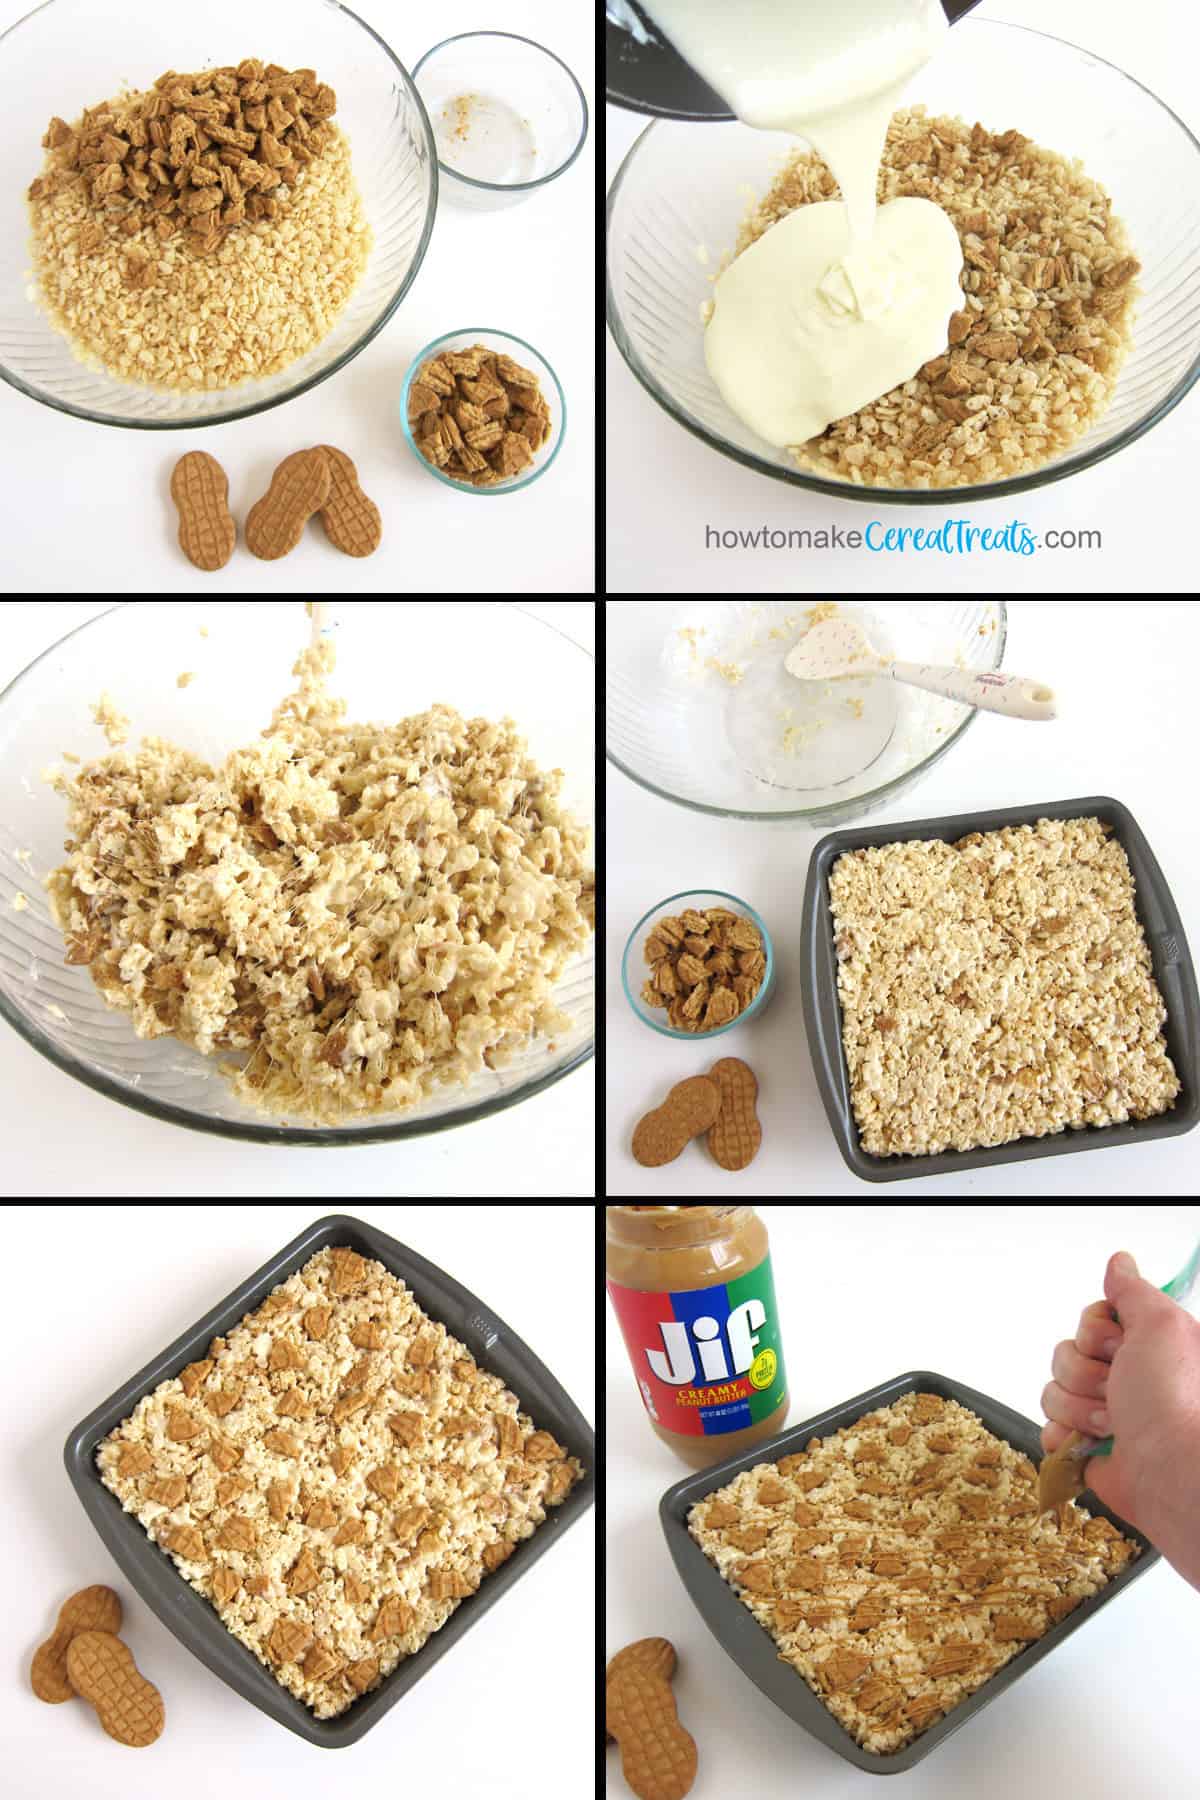 mix nutter butter cookie pieces with rice krispies, melted marshmallows, and butter, then spread into a pan and top with peanut butter